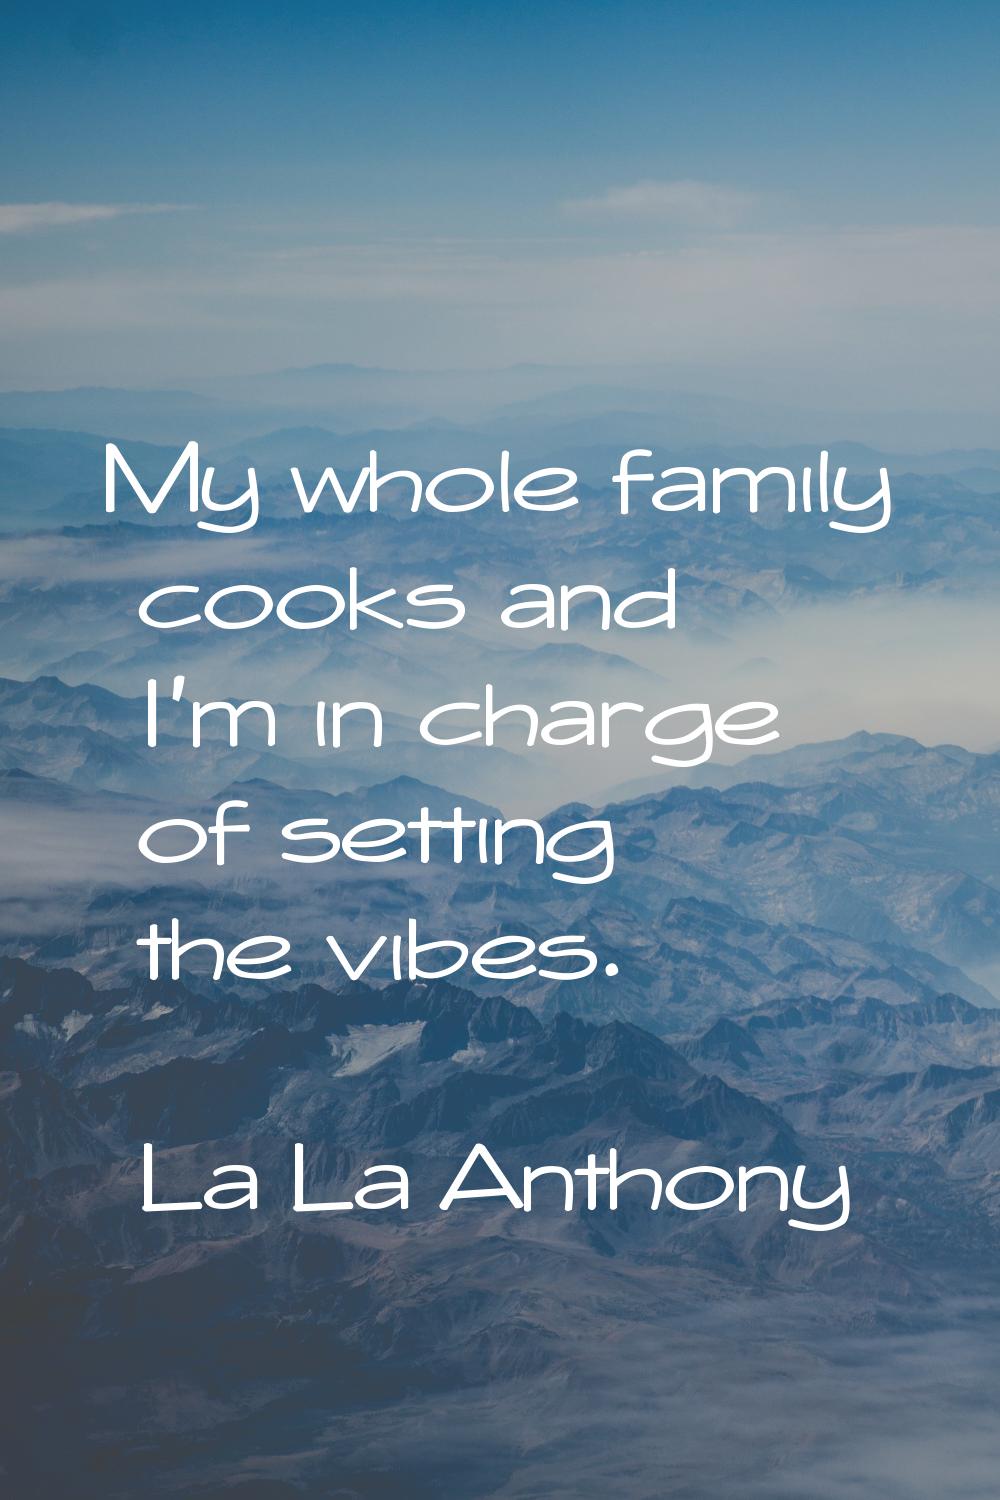 My whole family cooks and I'm in charge of setting the vibes.